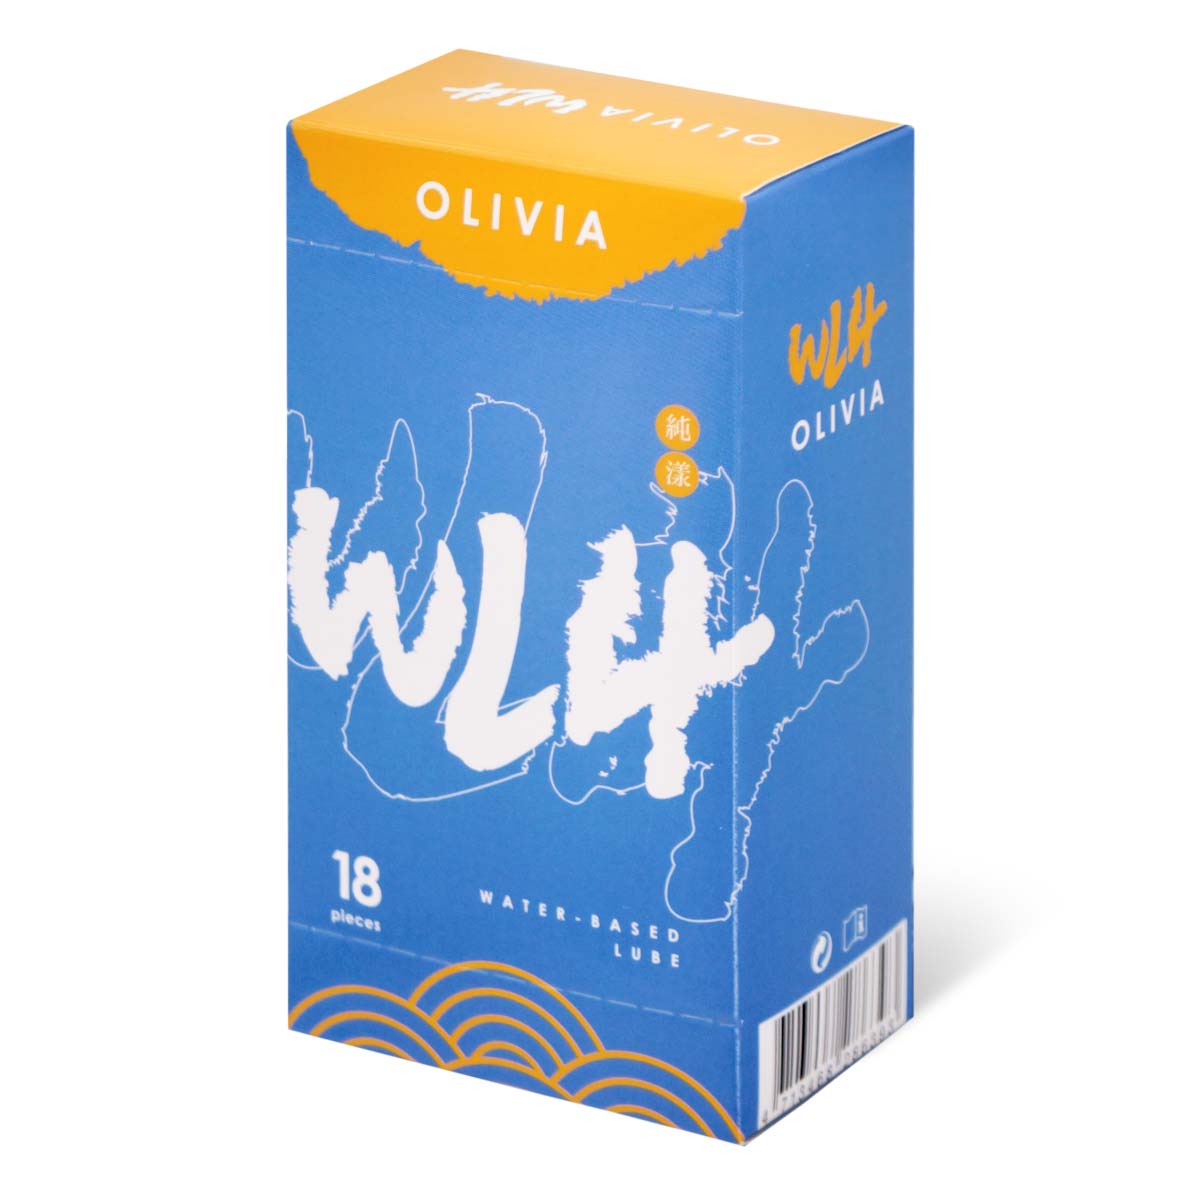 Olivia The East Pure 4g (sachet) 18 pieces Water-based Lubricant-p_1